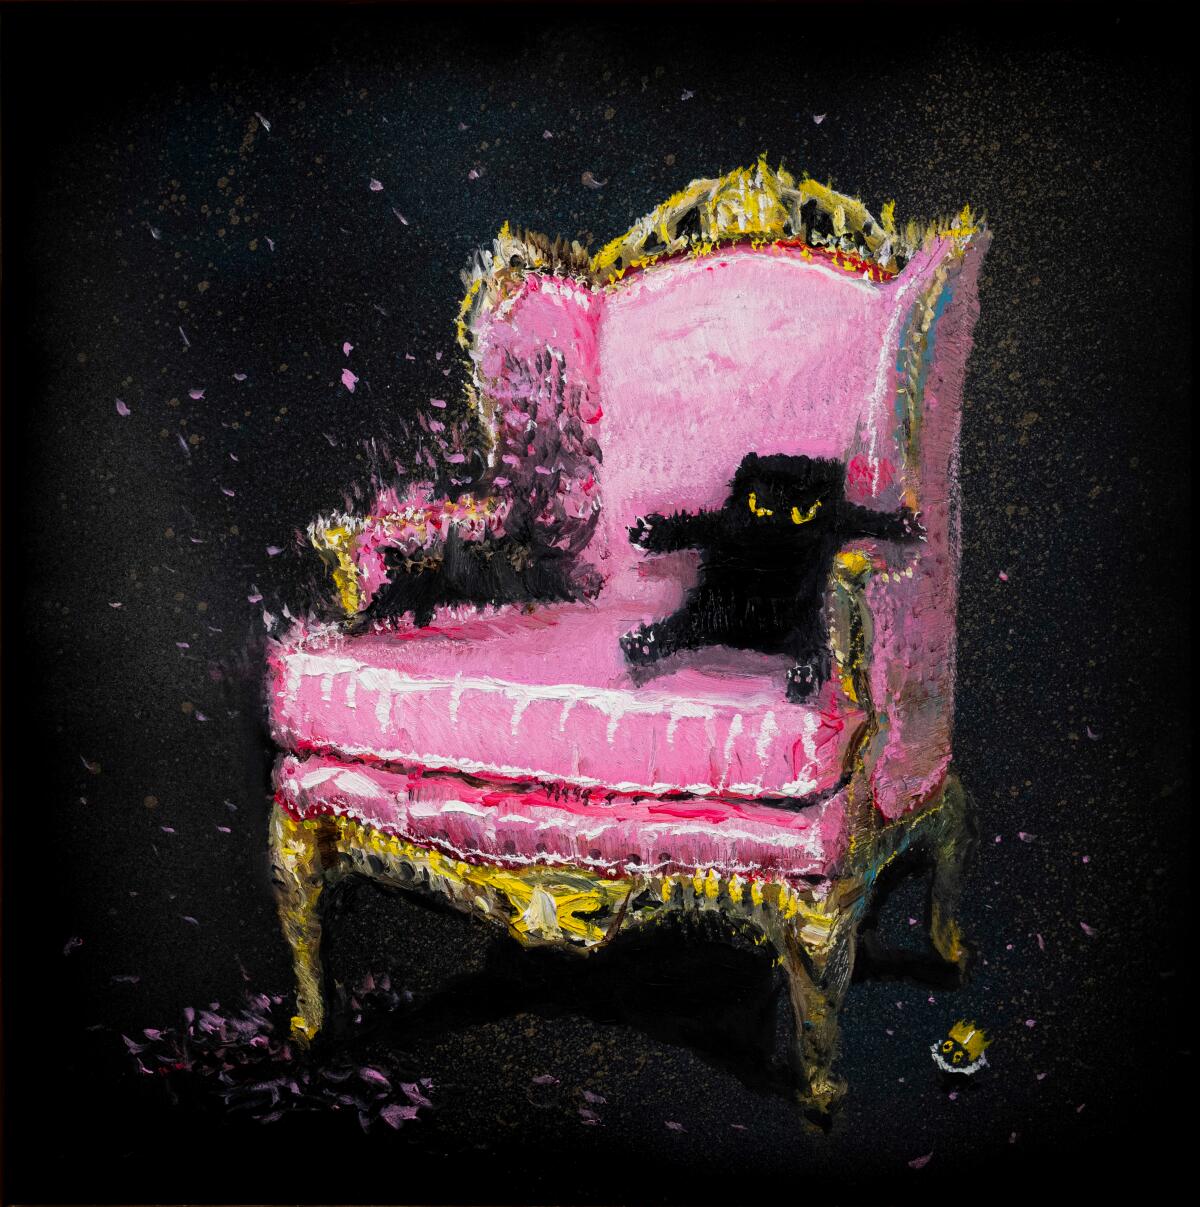 A painting by Vanessa Stockard shows a black cat seated like a person in a pink club chair.